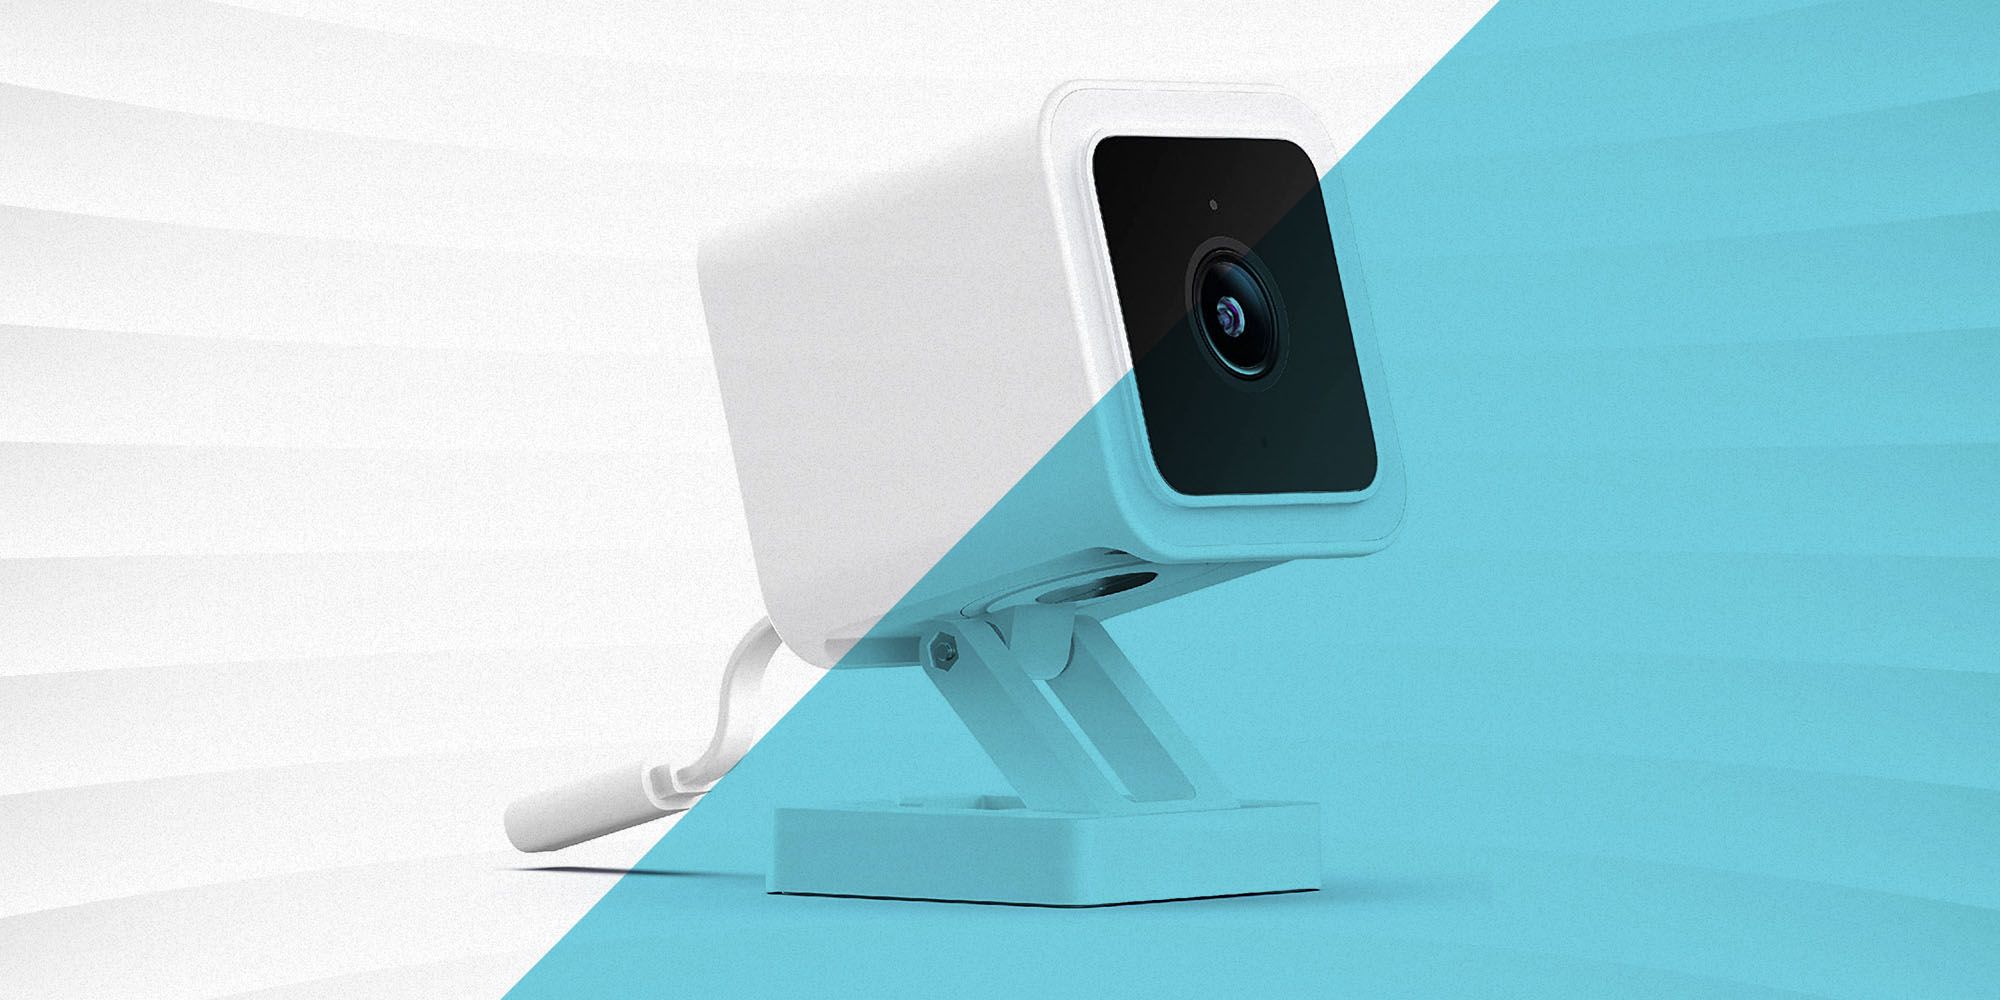 What Is The Best Cheap Security Camera